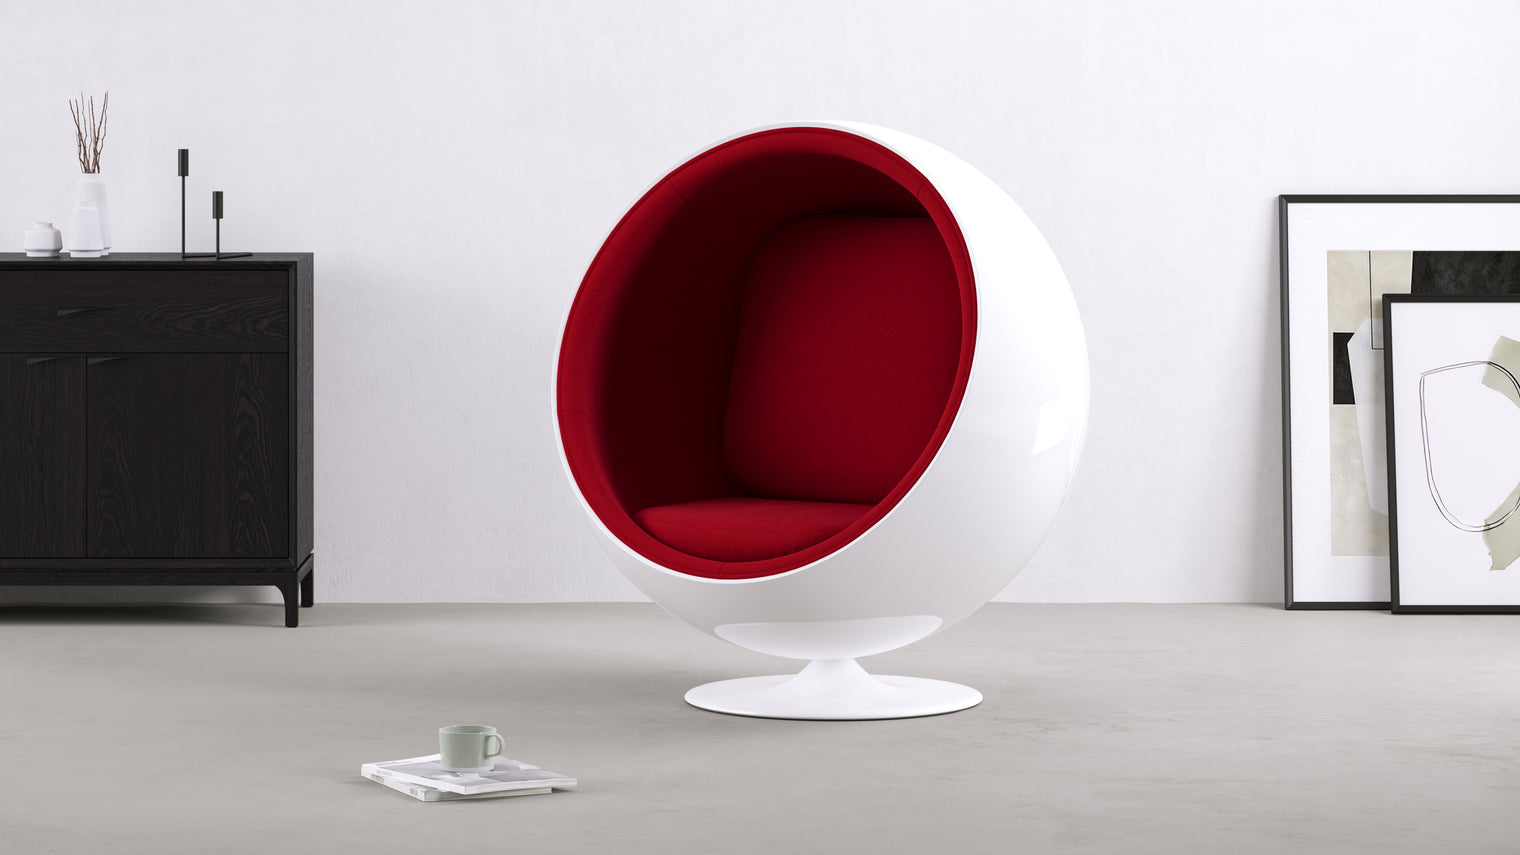 Welcome to the Future|When it debuted in the 1960s, the Ball Chair was ahead of its time. Flaunting a modern-meets-futuristic appearance, this entrancing seat was a bold new take on the blending of comfort and style. To this day this design masterpiece captivates and will continue doing so for years to come.
